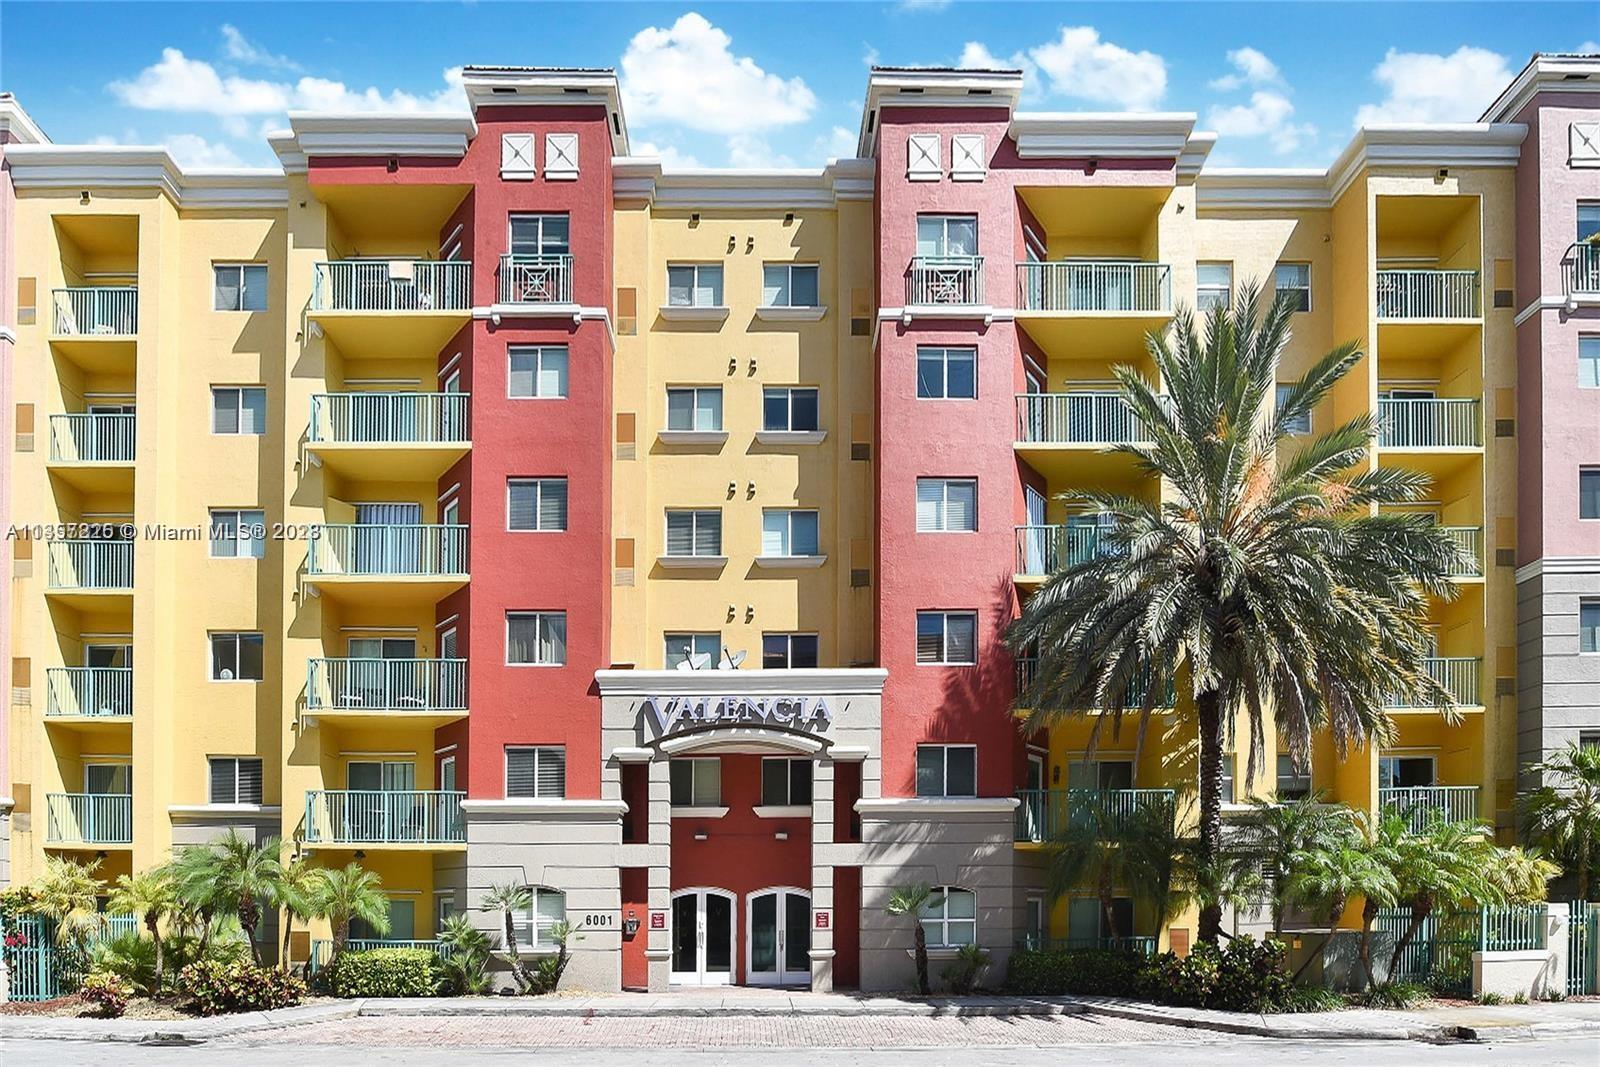 Penthouse unit at Valencia in South Miami! Features a split bedroom plan, open balcony, two covered parking spaces on same floor. Enjoy lots of light. Walk in closets. Full size washer and Dryer. Laminate wood floors. AC was replaced. Amenities include: club room, pool, exercise room.